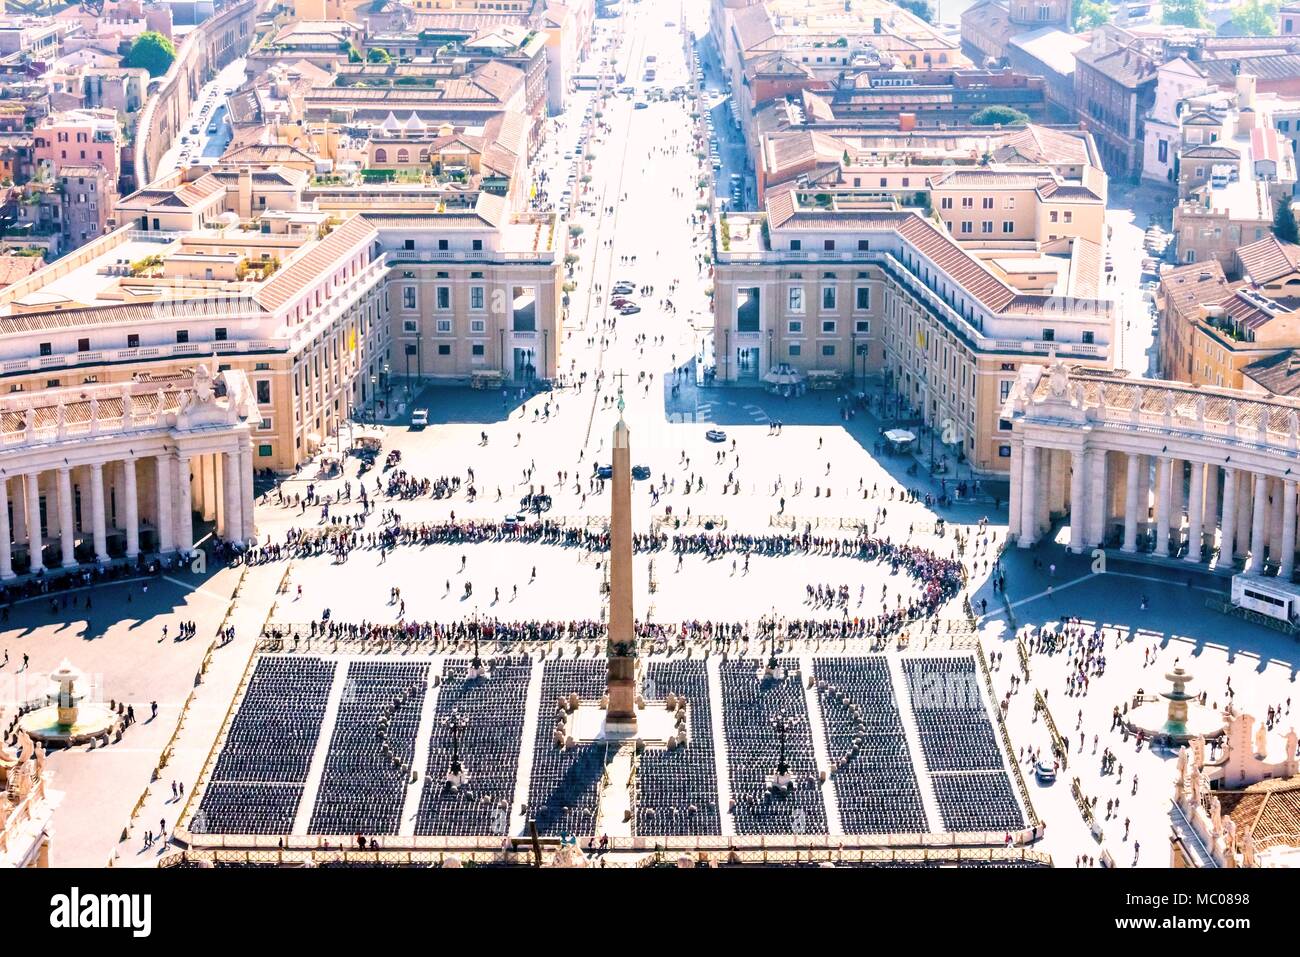 Long queue of visitors waiting to enter in St. Peter's basilica in Vatican. Stock Photo